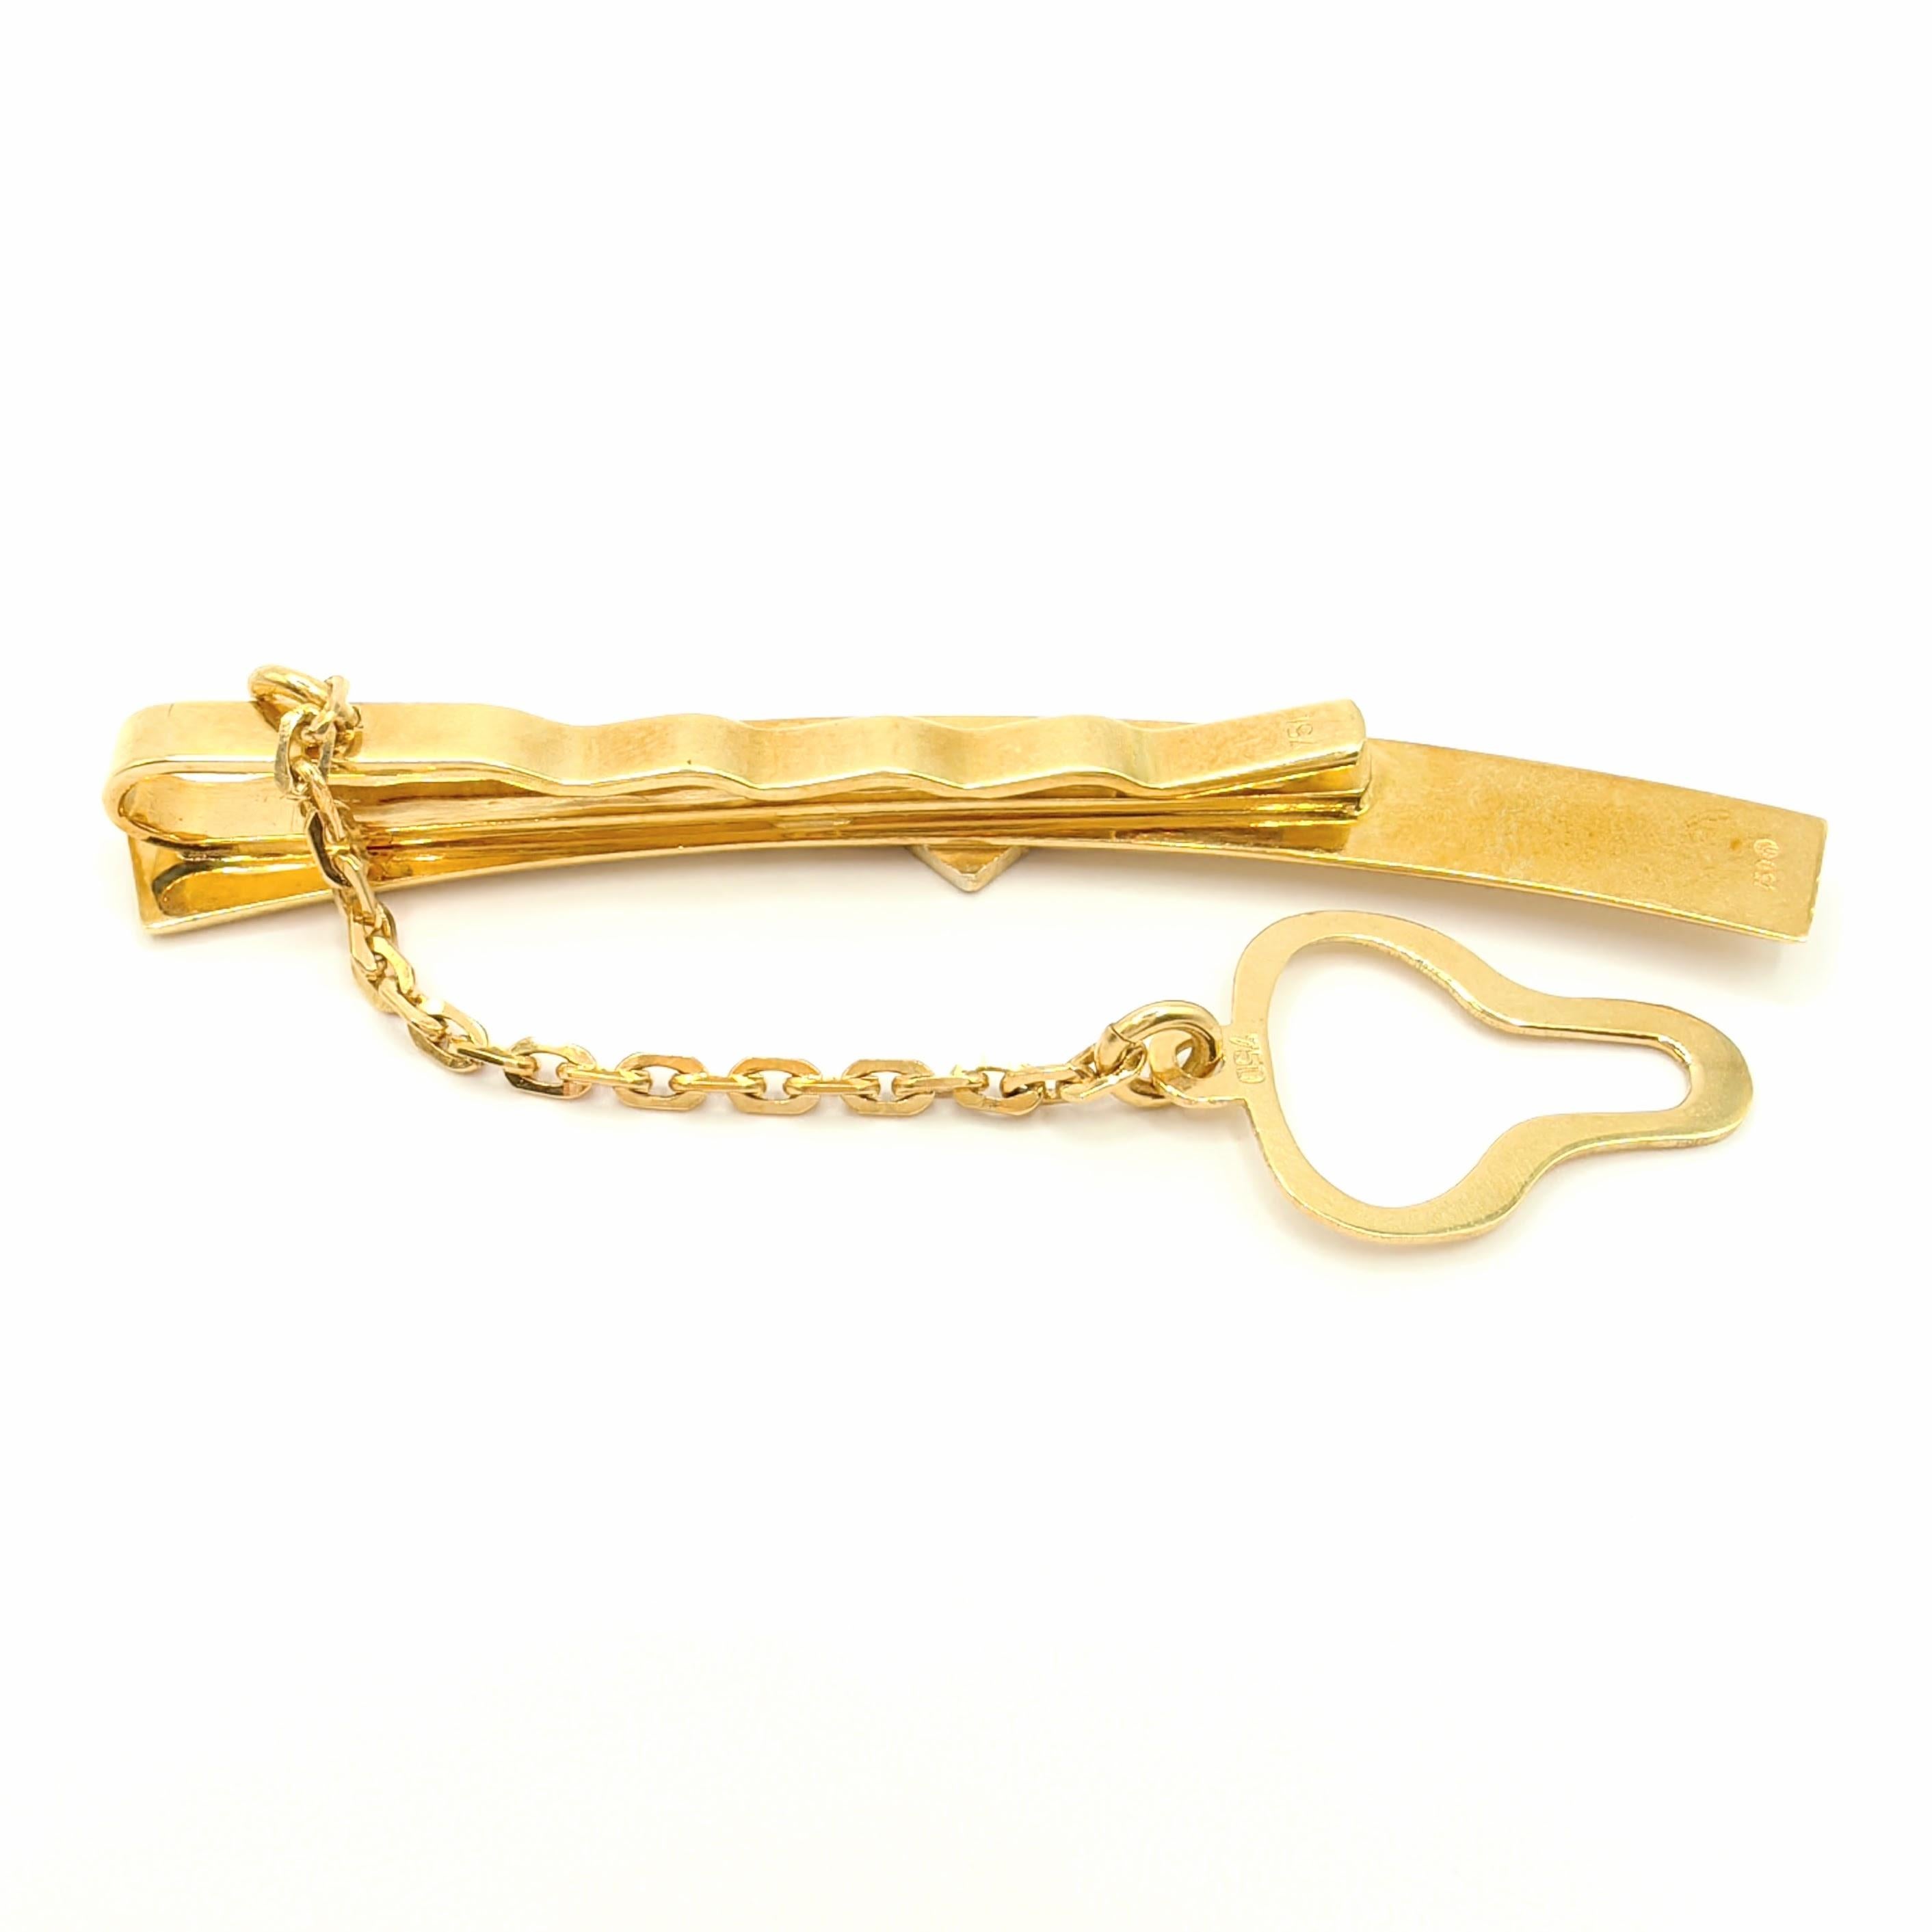 Contemporary Vintage Fan Shape Tie Clip With Chain in 18K Yellow & White Two-tone Gold For Sale